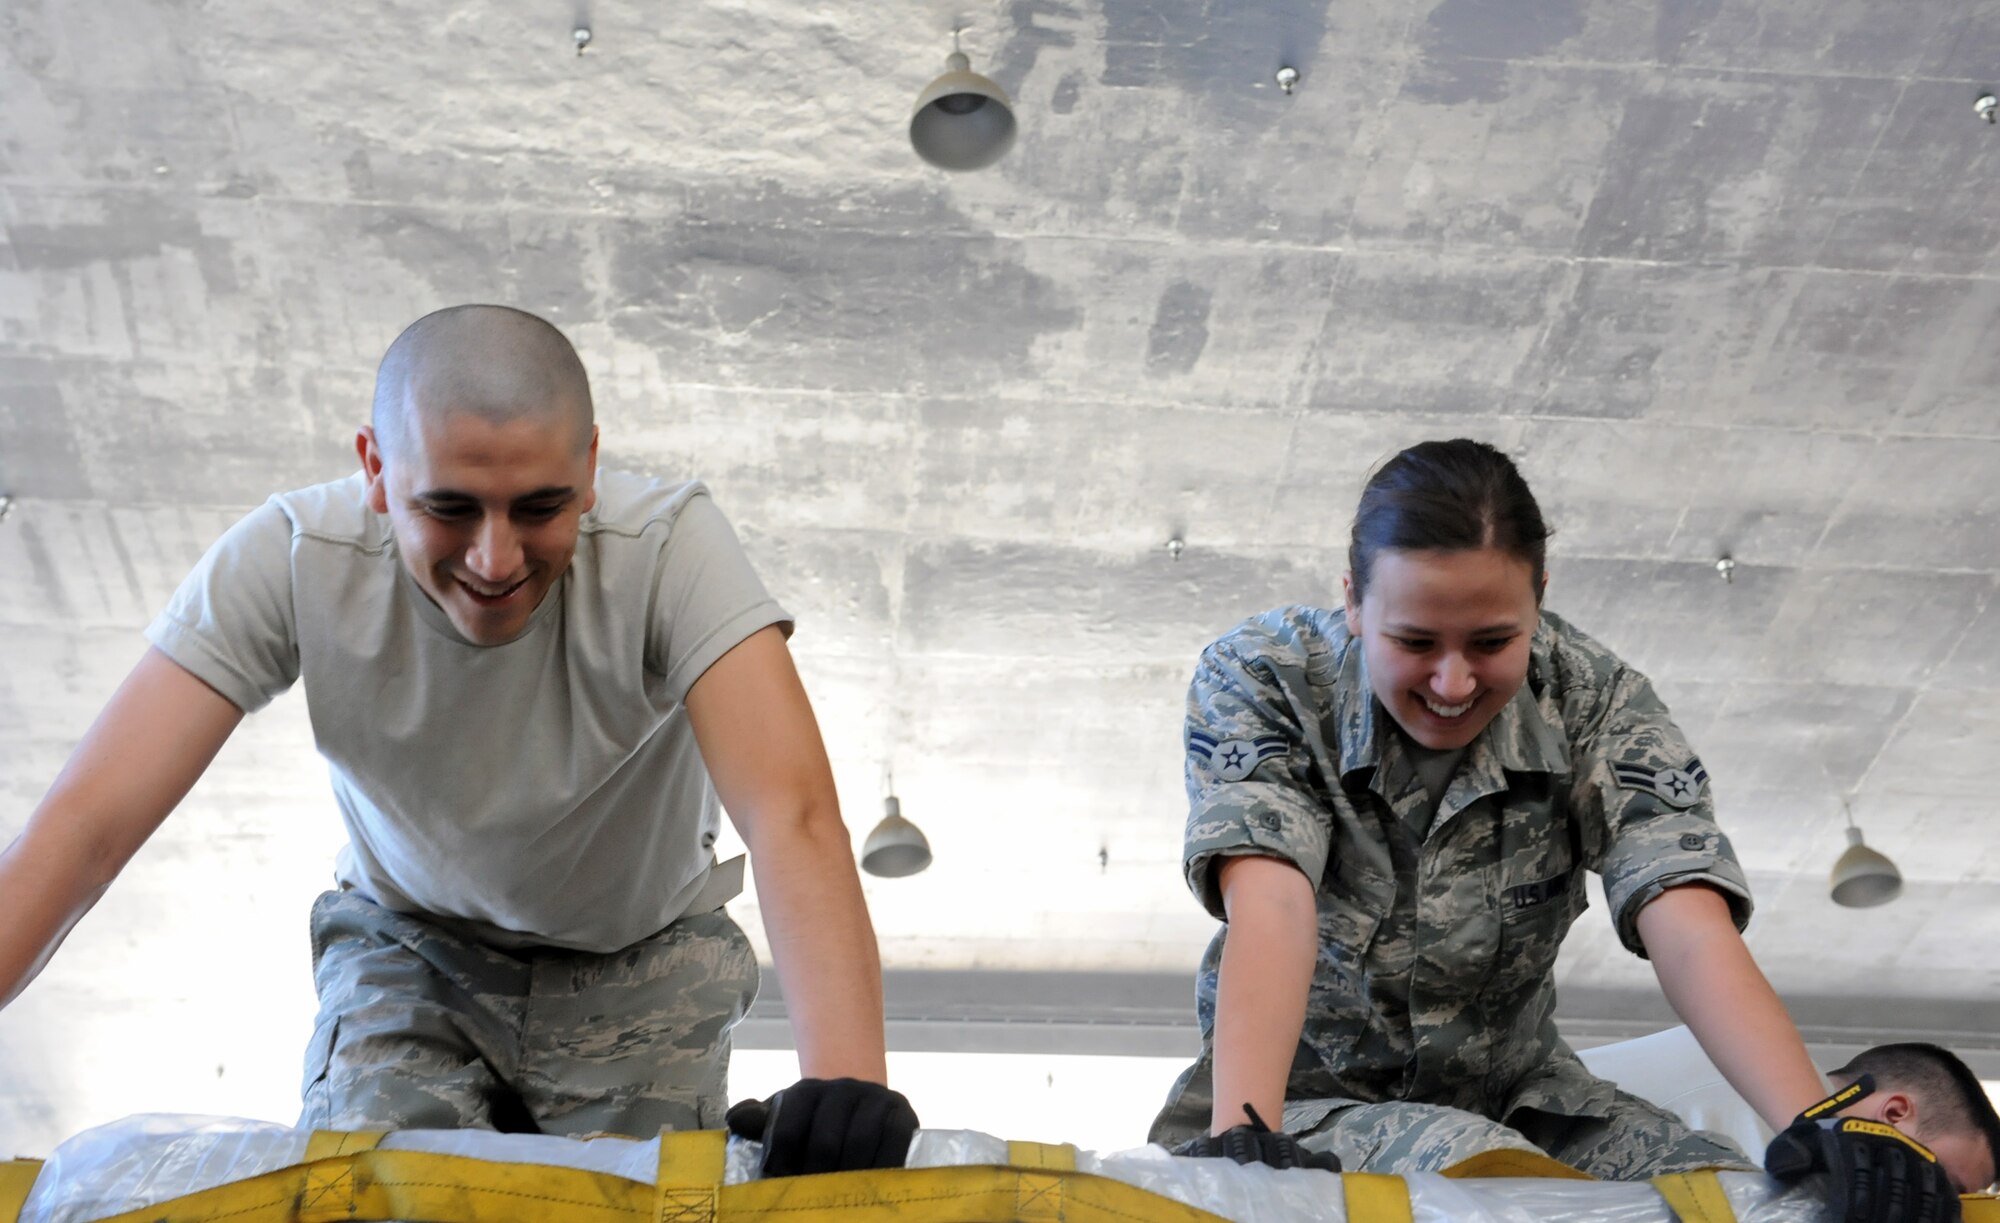 Staff. Sgt. Freddy Arriaga, non-commissioned officer-in-charge of storage and distribution, and Airman 1st Class Margaret Noll, 15th Medical Support Squadron Medical Materiel Journeyman, assemble a pallet in Hangar 4 during a 15th Medical Group training day session July 19 at Joint Base Pearl Harbor-Hickam, Hawaii. The Medical Logistics flight is responsible for ordering, storing and distributing medical supplies to 15th Medical Group clinics as well as storing and preparing medical supplies for contingency and deployment operations. (U.S. Air Force photo by Staff Sgt. Nathan Allen)
